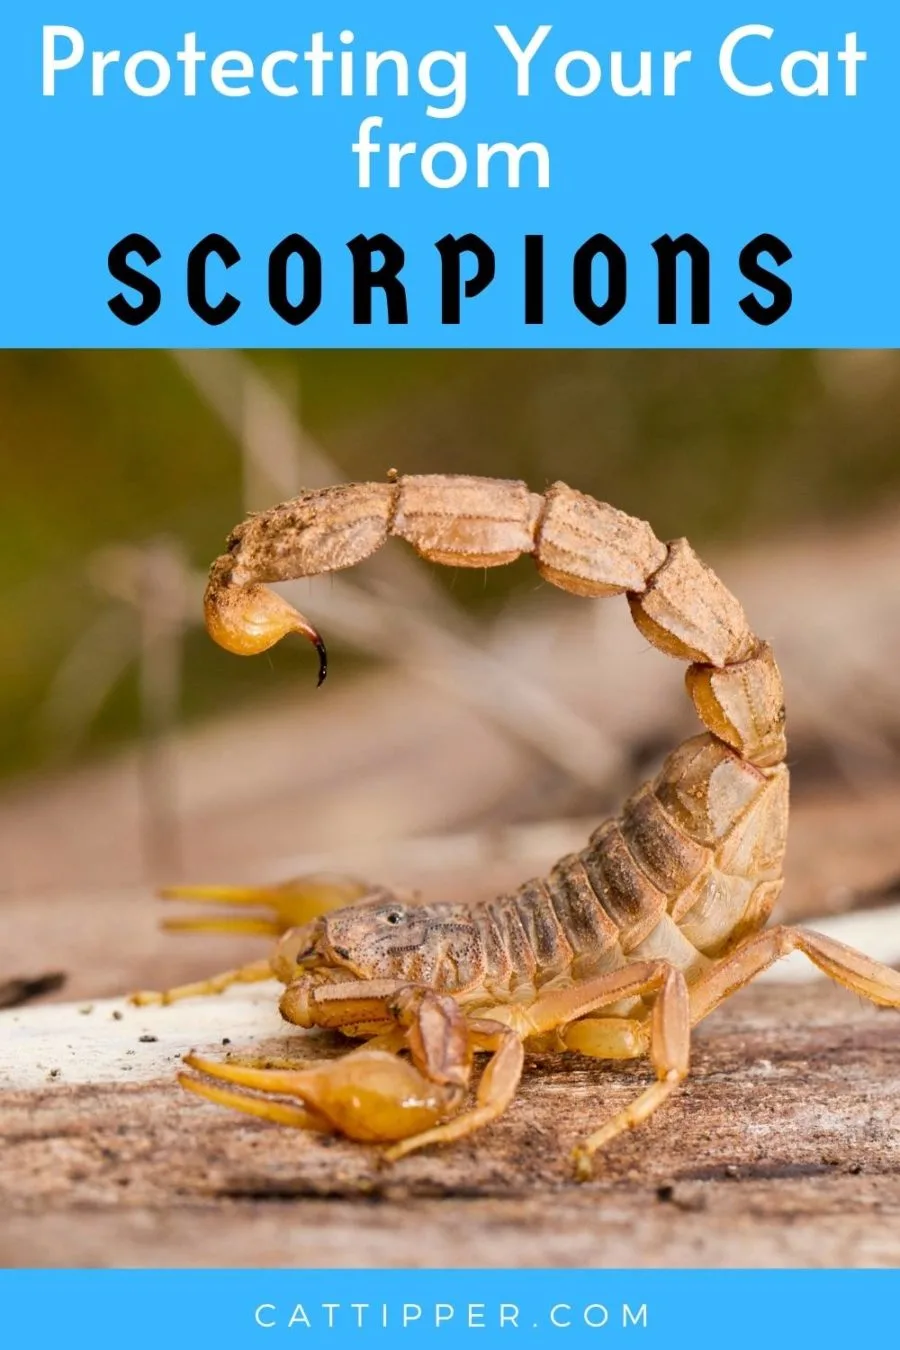 Scorpions and cats -- what to do if your cat is stung by a scorpion